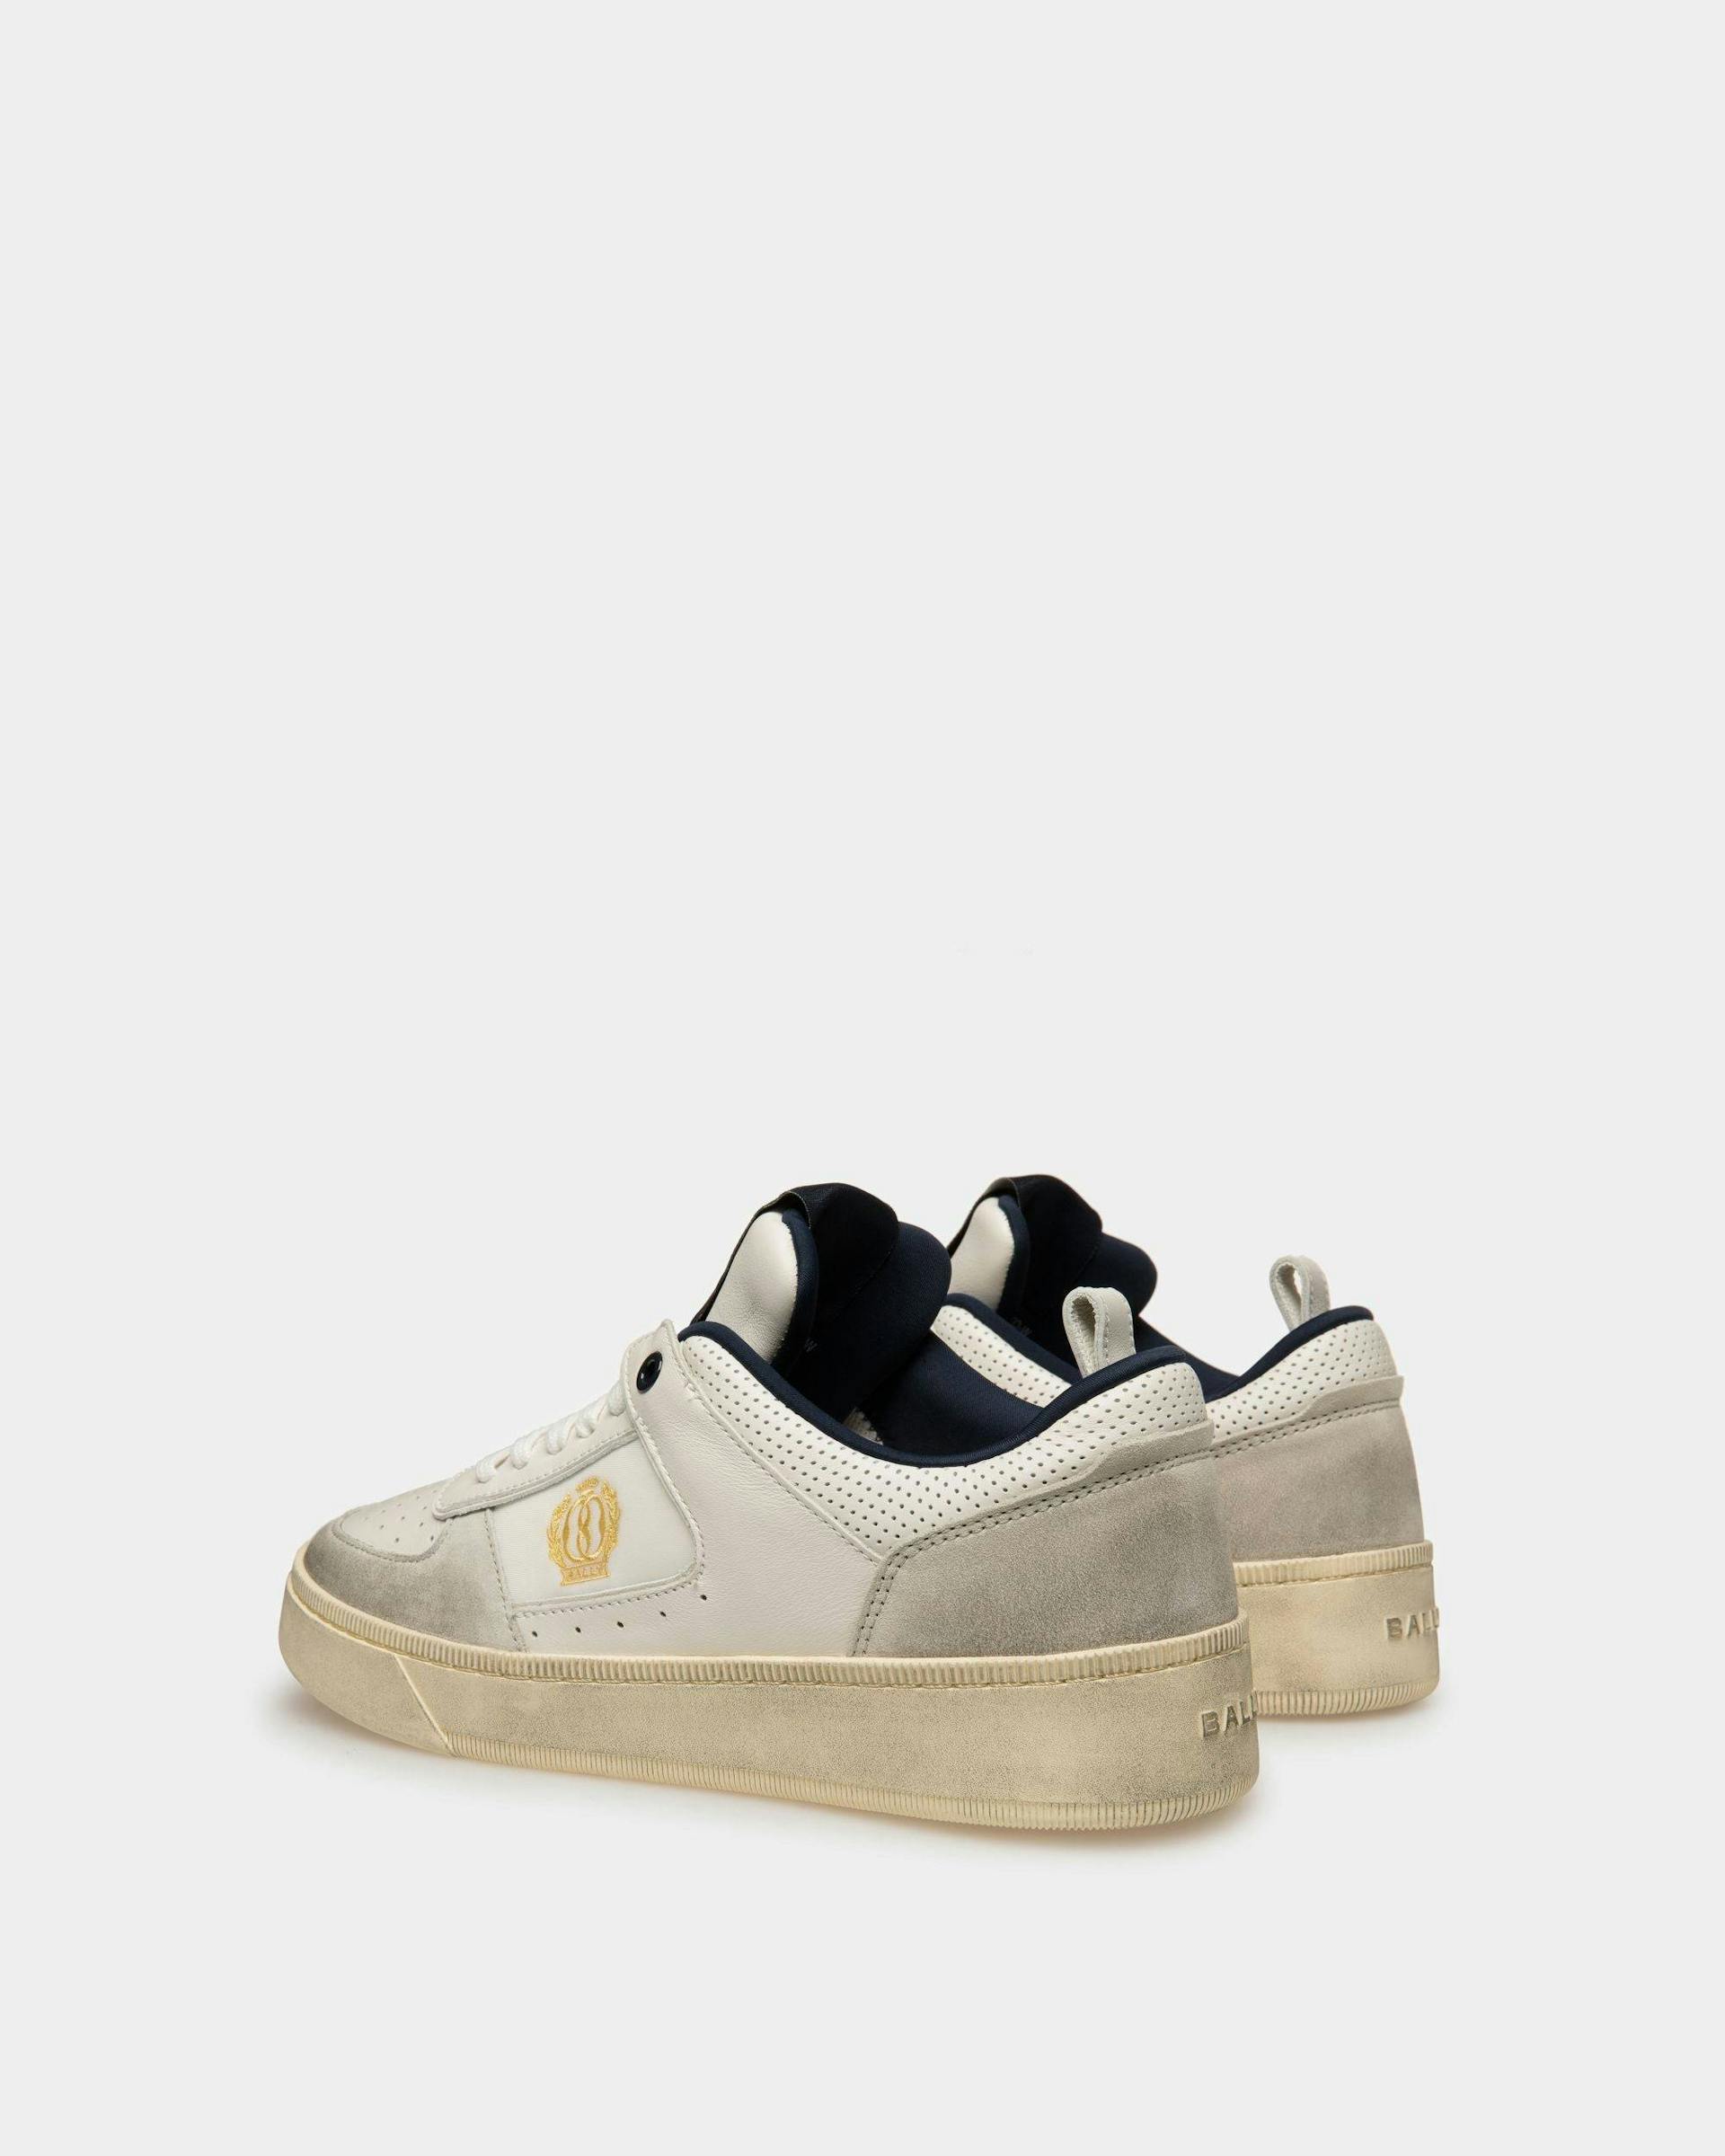 Raise Sneakers In Dusty White And Midnight Leather - Women's - Bally - 03